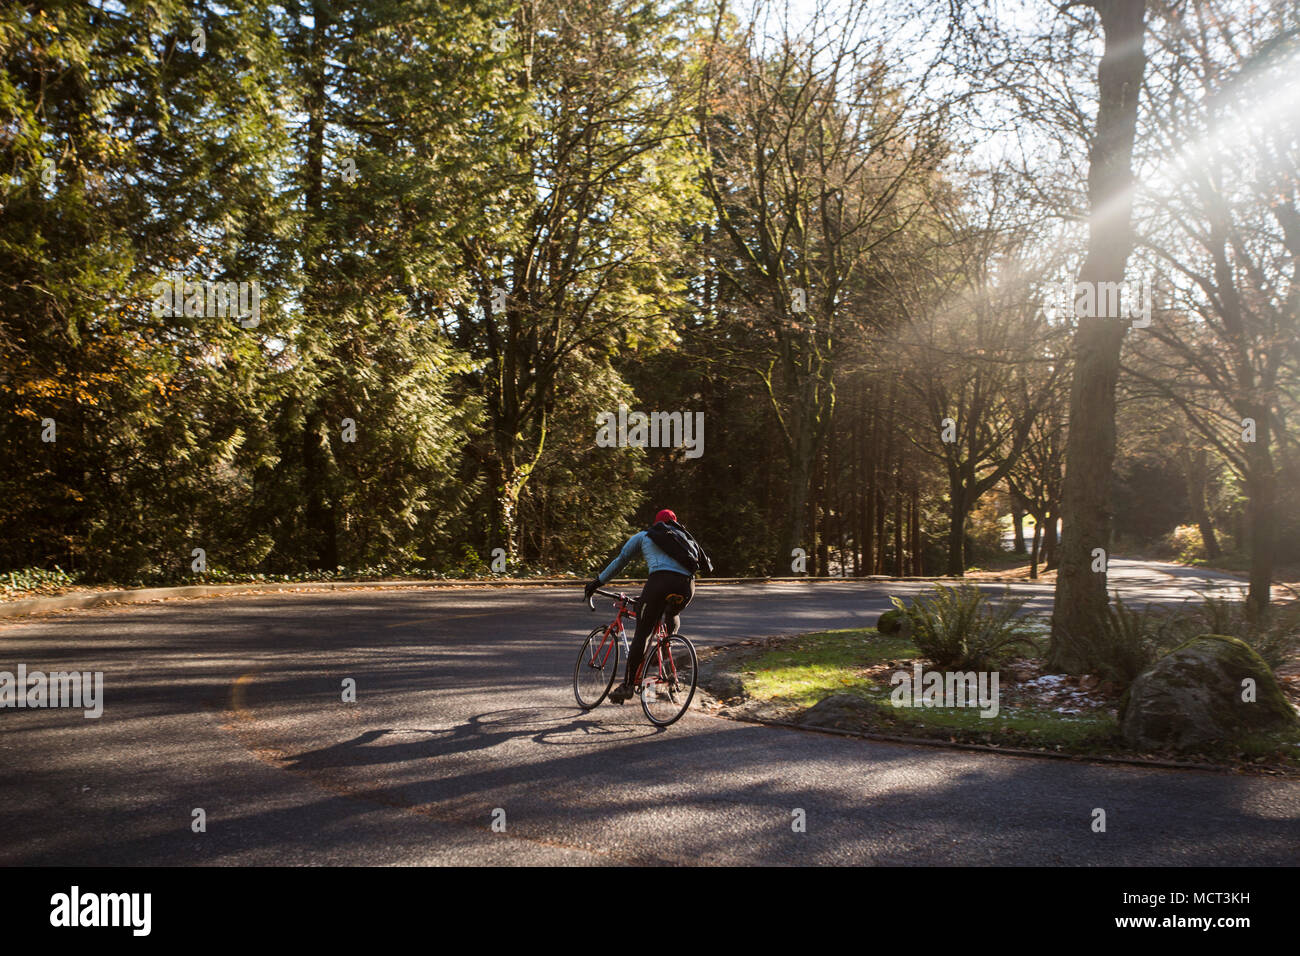 Man cycling on road surrounded by trees, Seattle, Washington State, USA Stock Photo